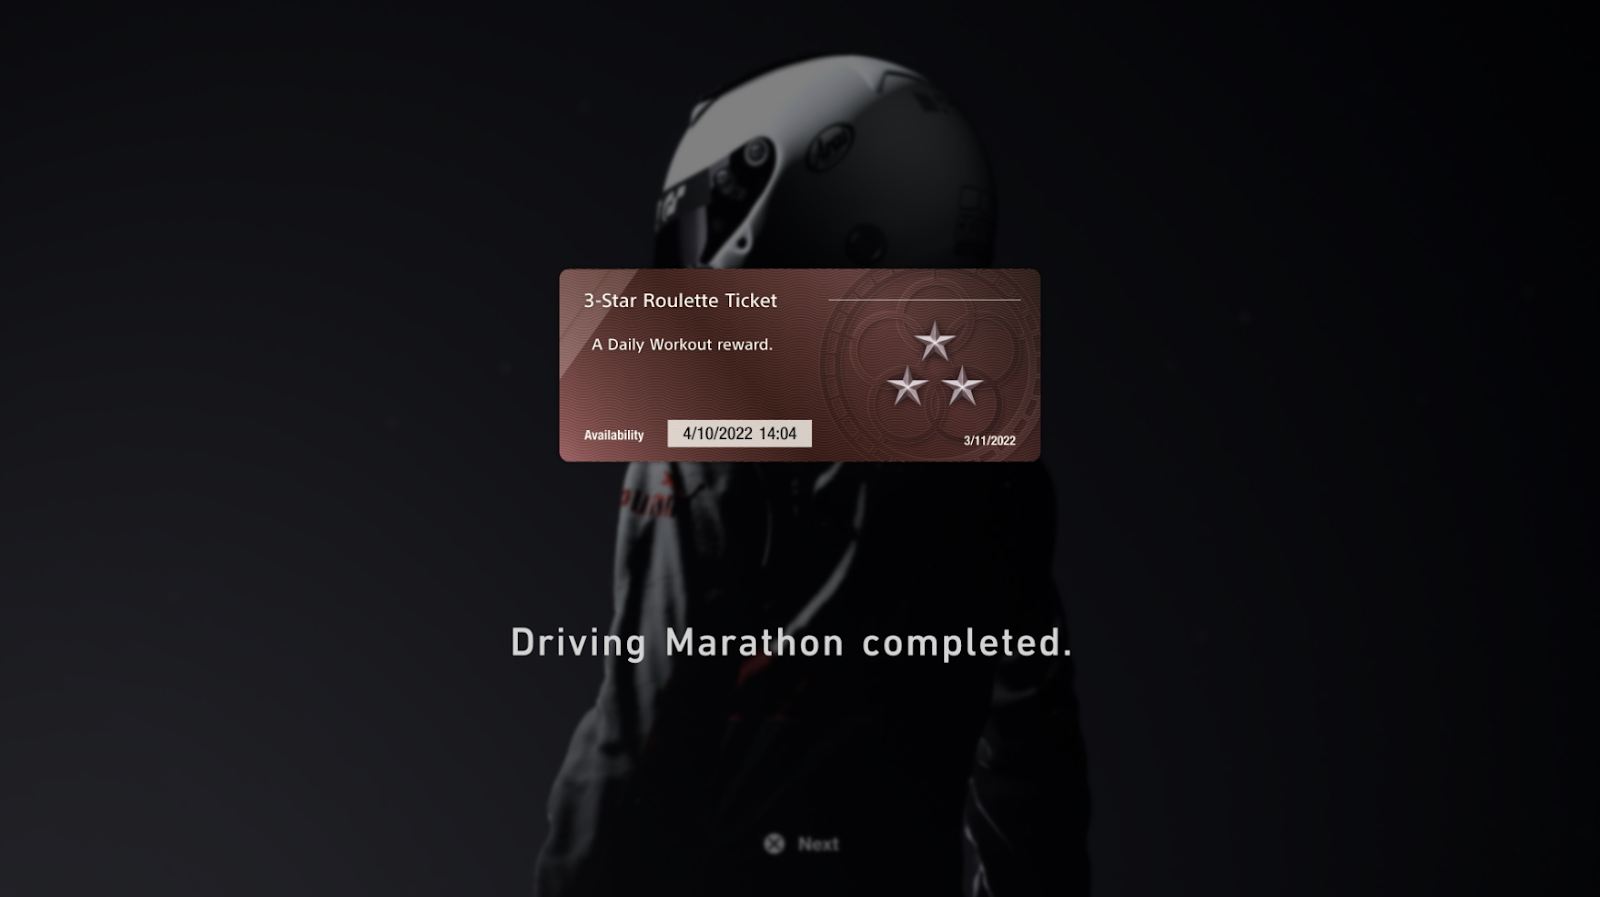 Gran Turismo offers rewards as a way to encourage users to complete daily tasks.